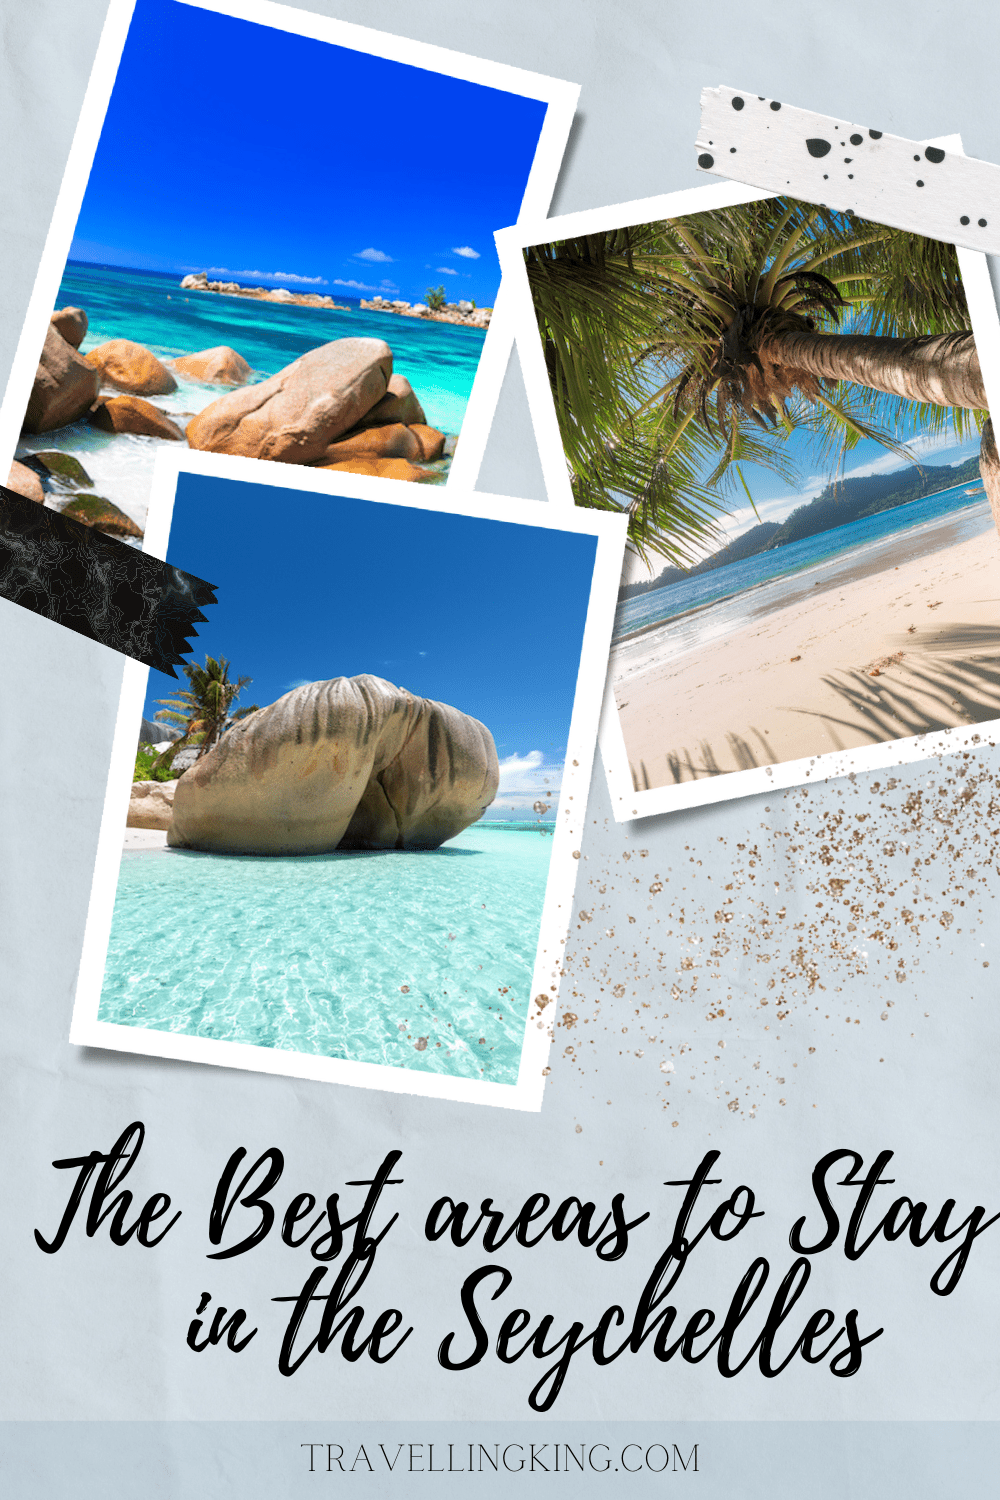 Where to stay in the Seychelles